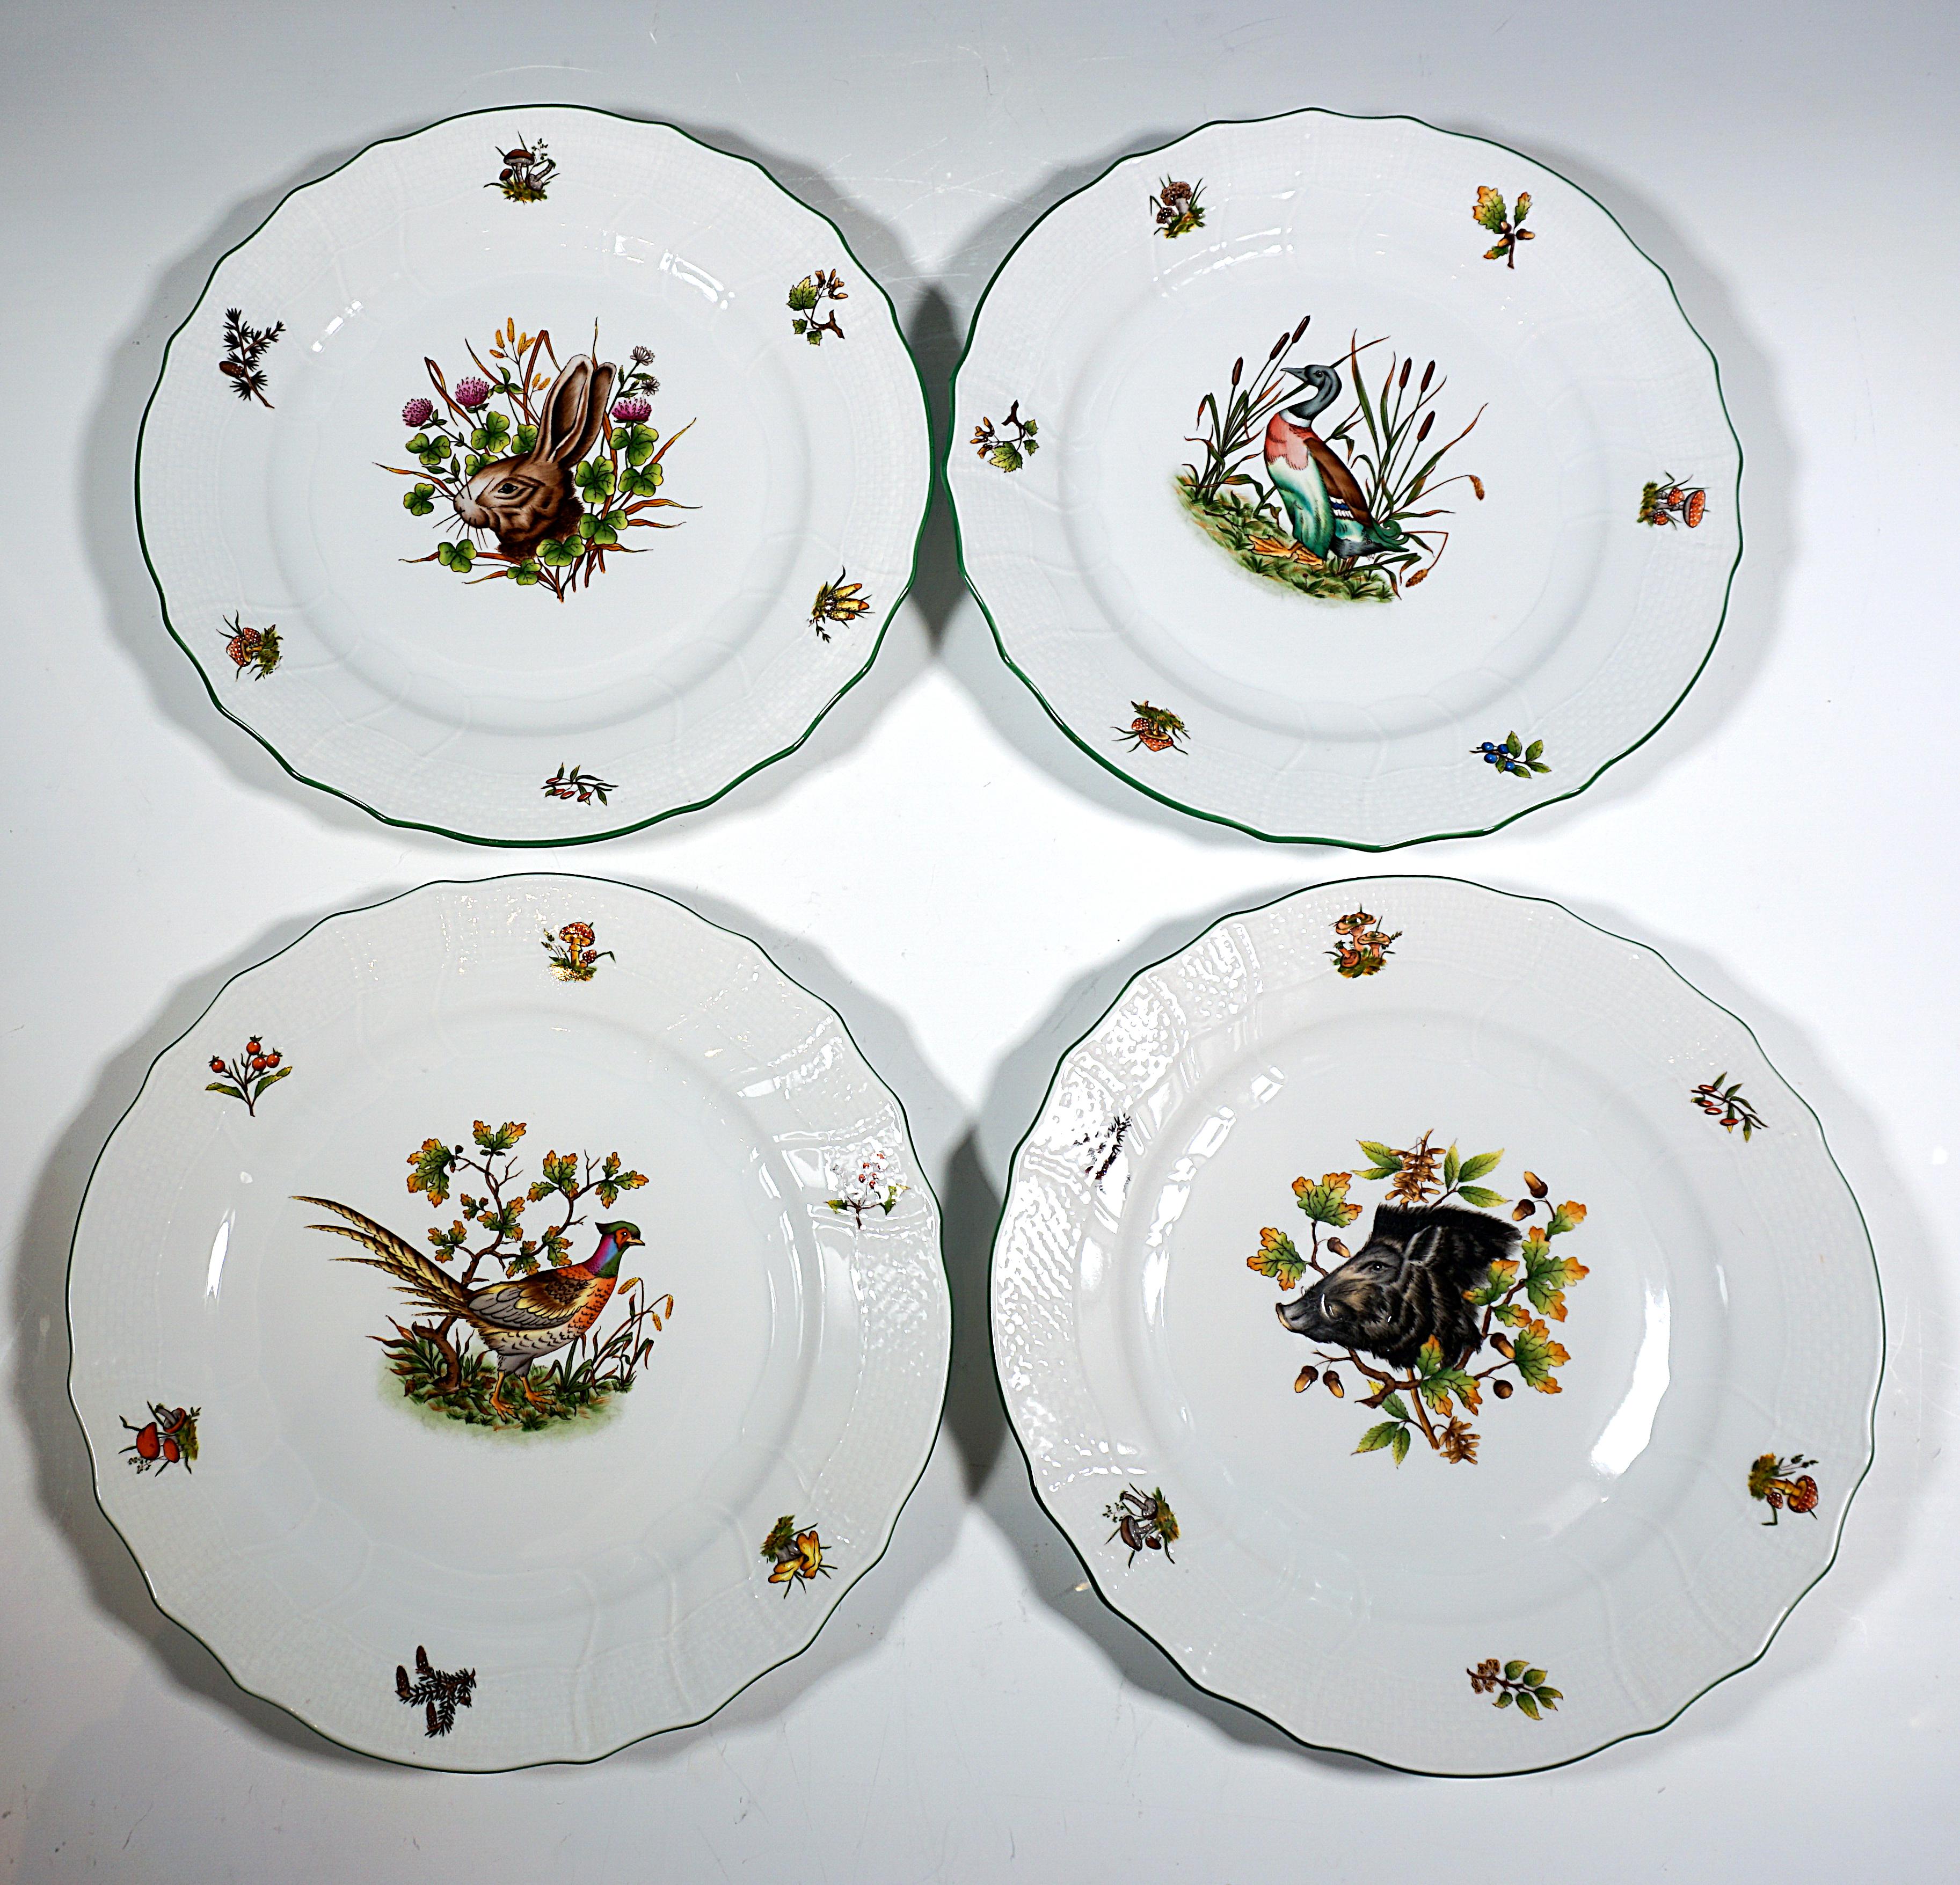 Porcelain Dinner Set For 12 Persons 'Classic Hunter Trophies' Herend Hungary, 20th Century